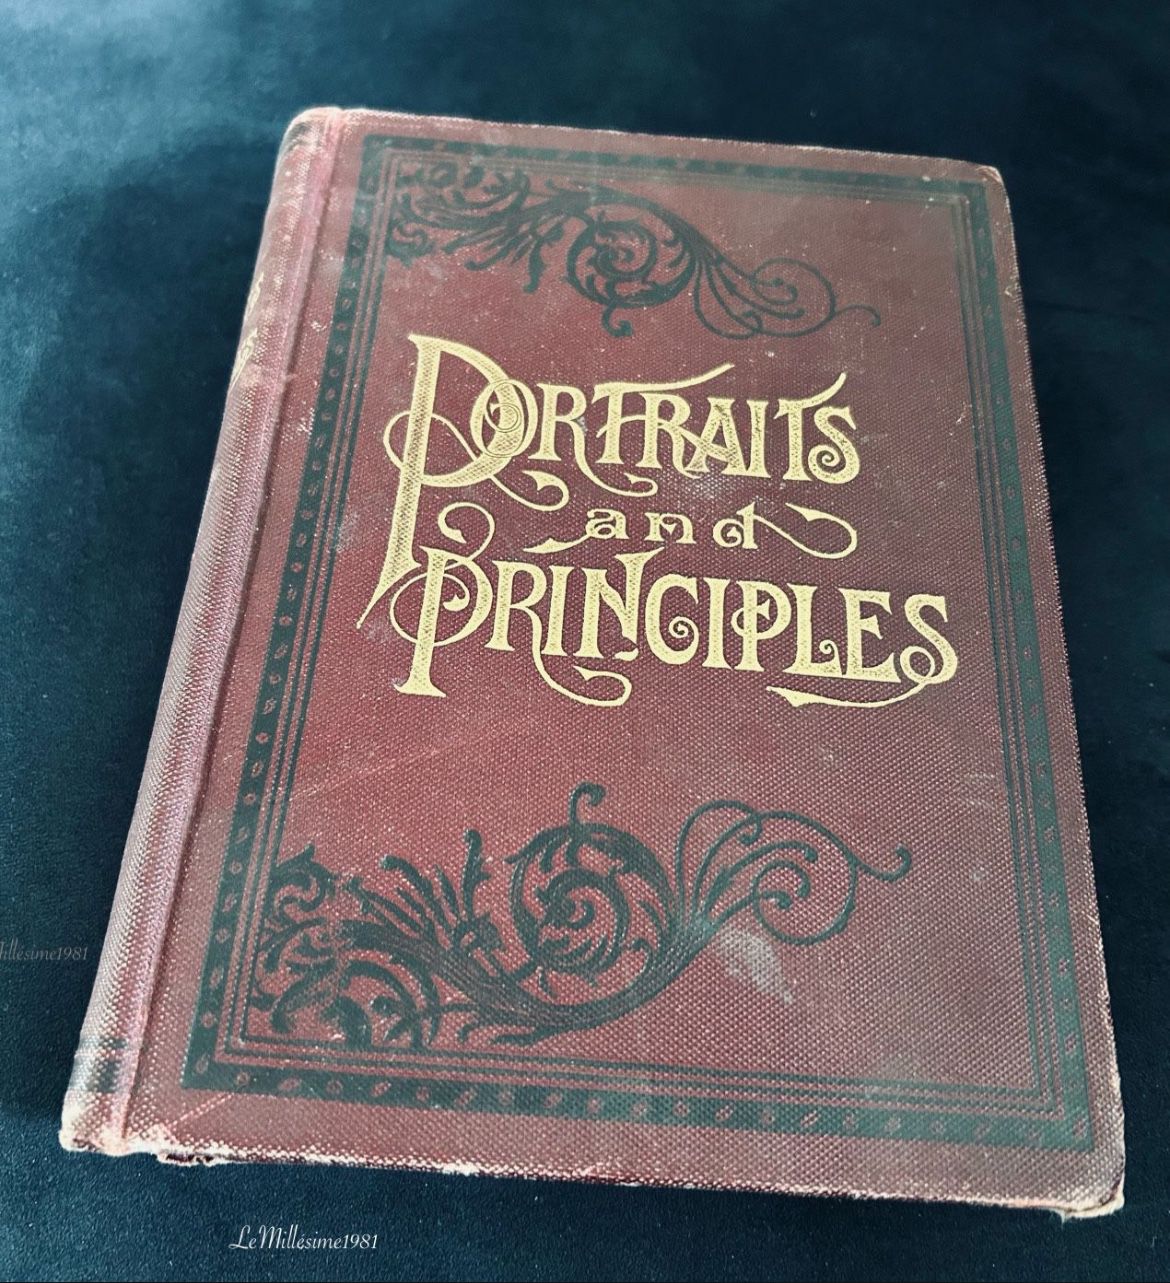 Portraits And Principles of the World's Great Men and Women ~ With Practical Lessons on Successful Life 1900